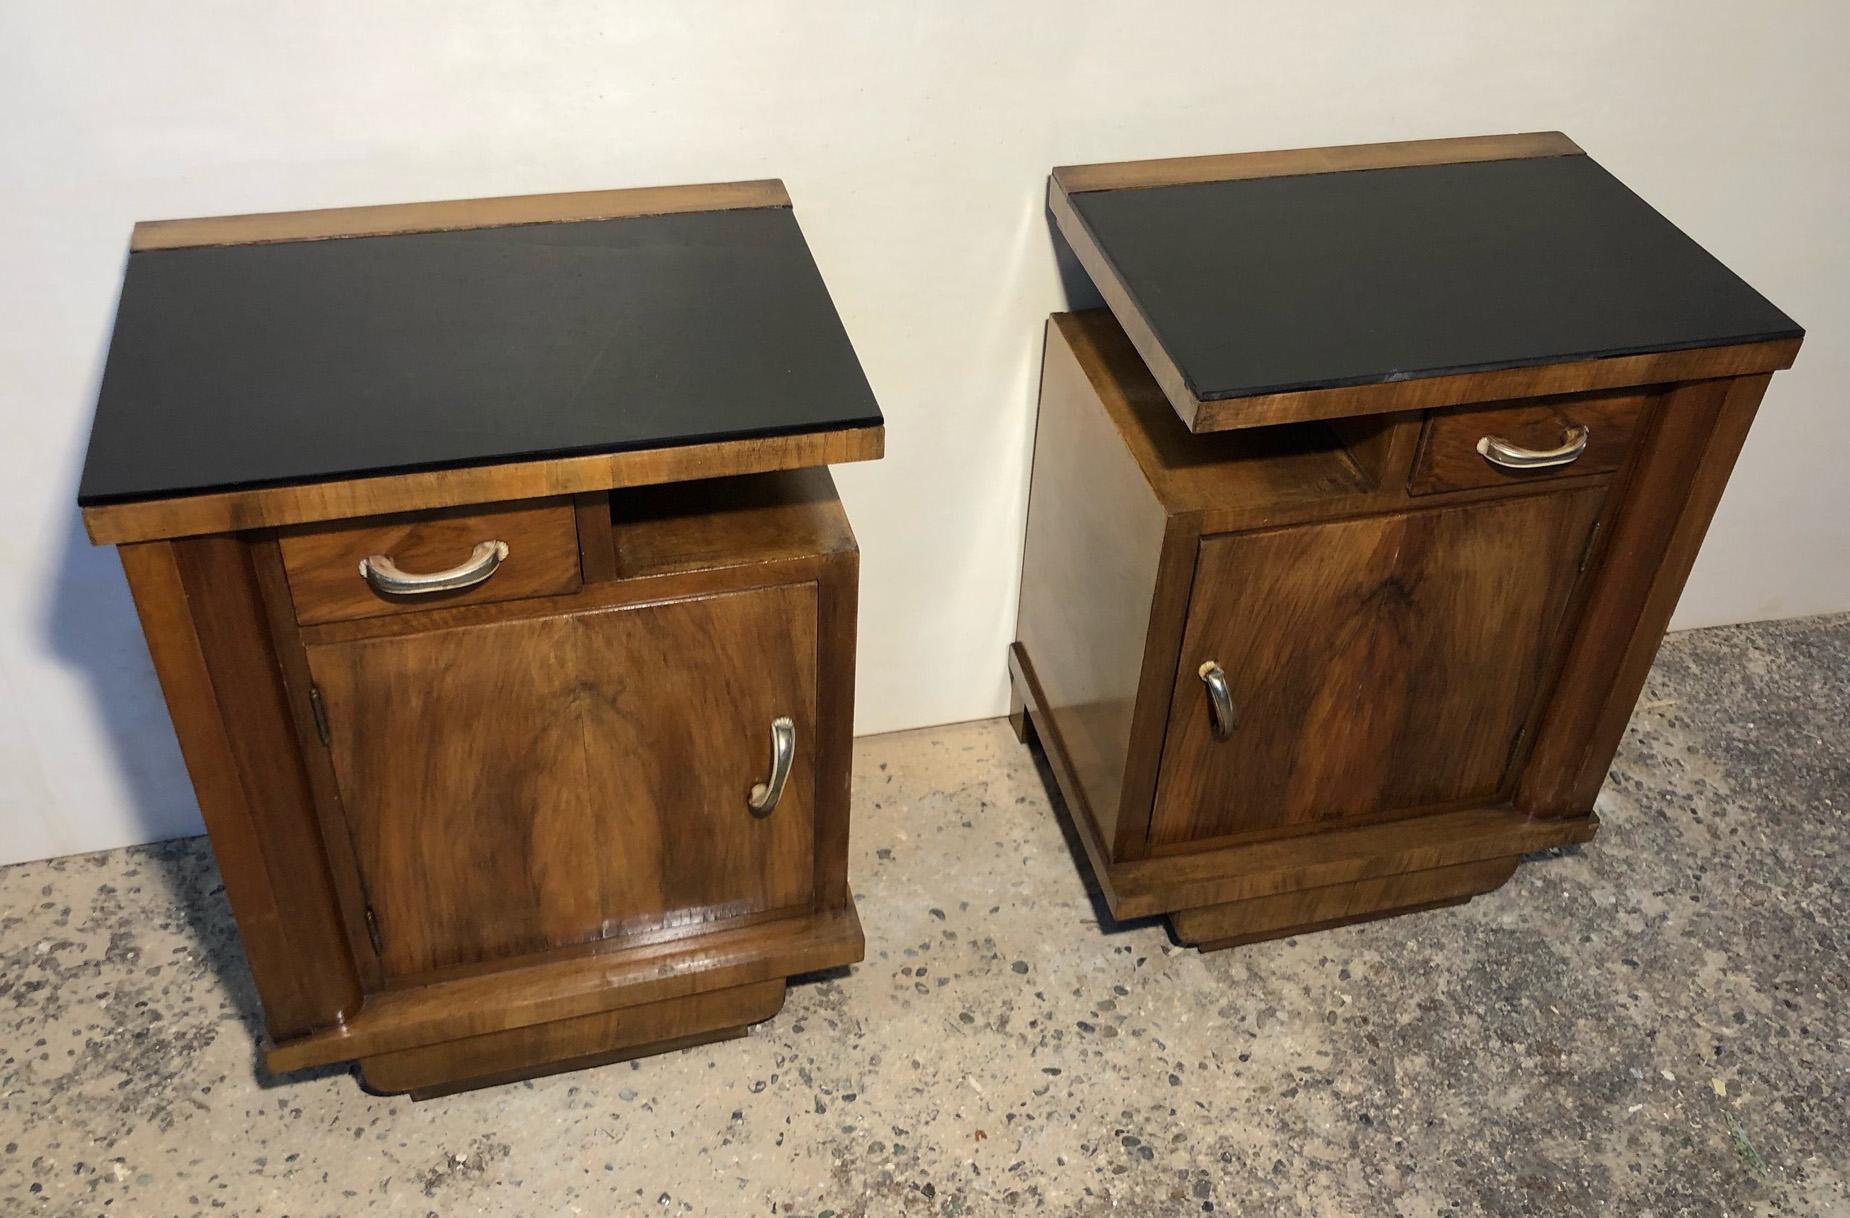 1930's pair of original Italian deco nightstands with black glass, right and left, in walnut.